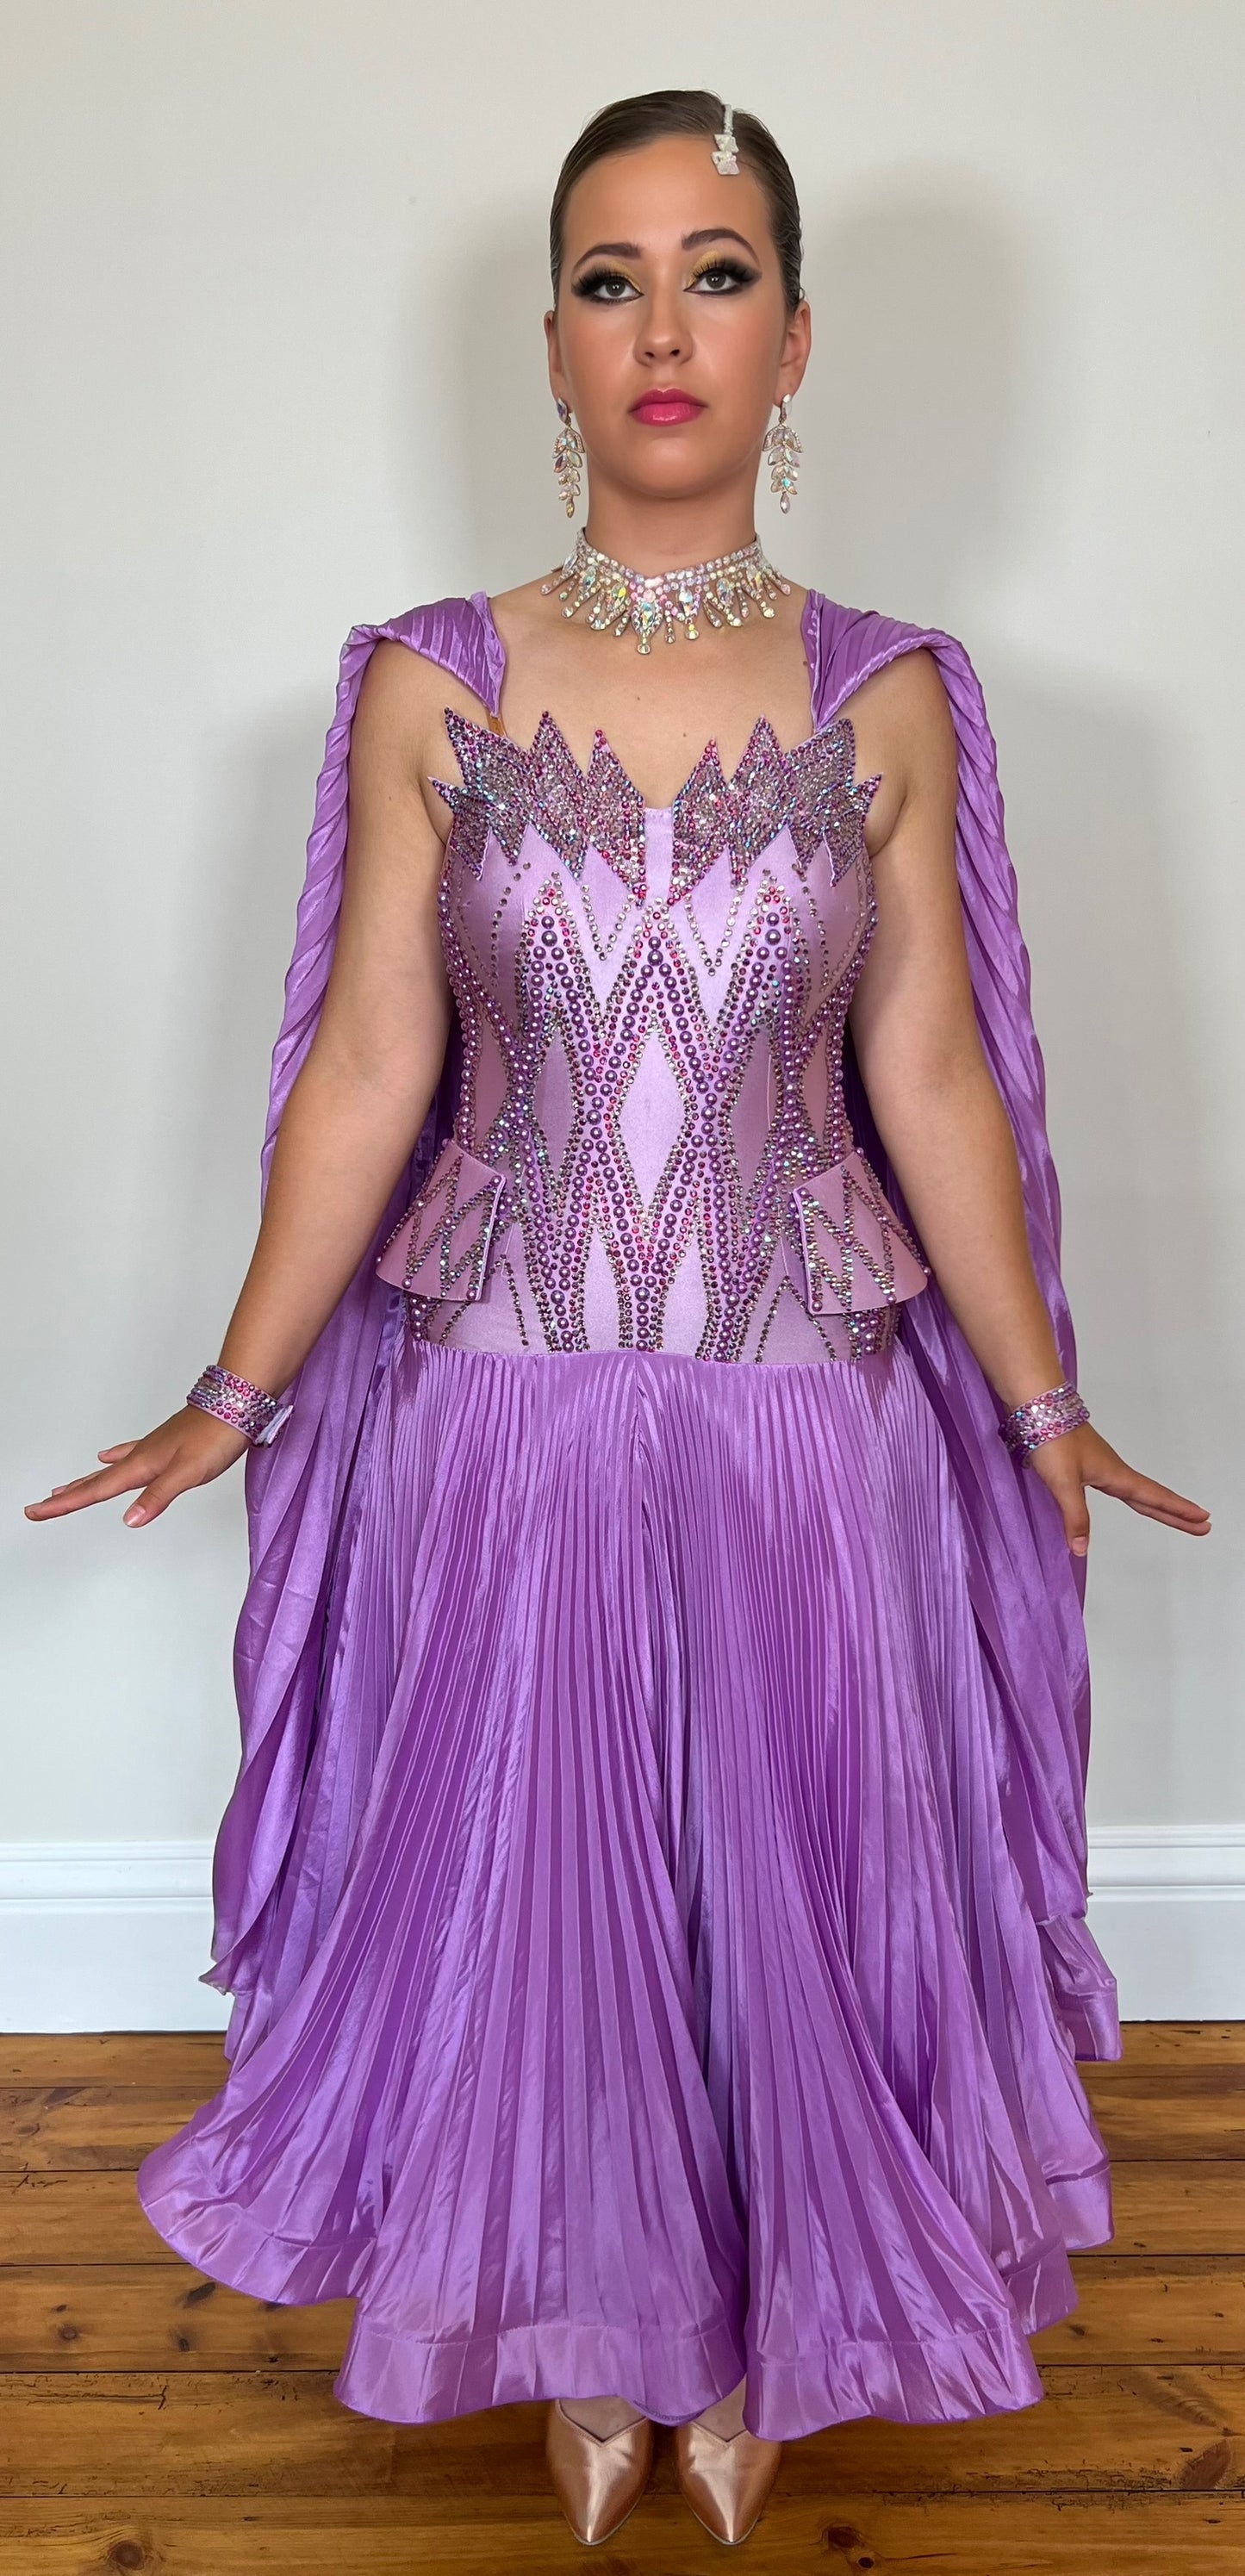 046 Violet Pleated skirt & Shoulder floats Ballroom Dress. Stunning Bodice detail with hip detailing. Decorated with violet pearls, AB & fuchsia stones. Pleated should floats